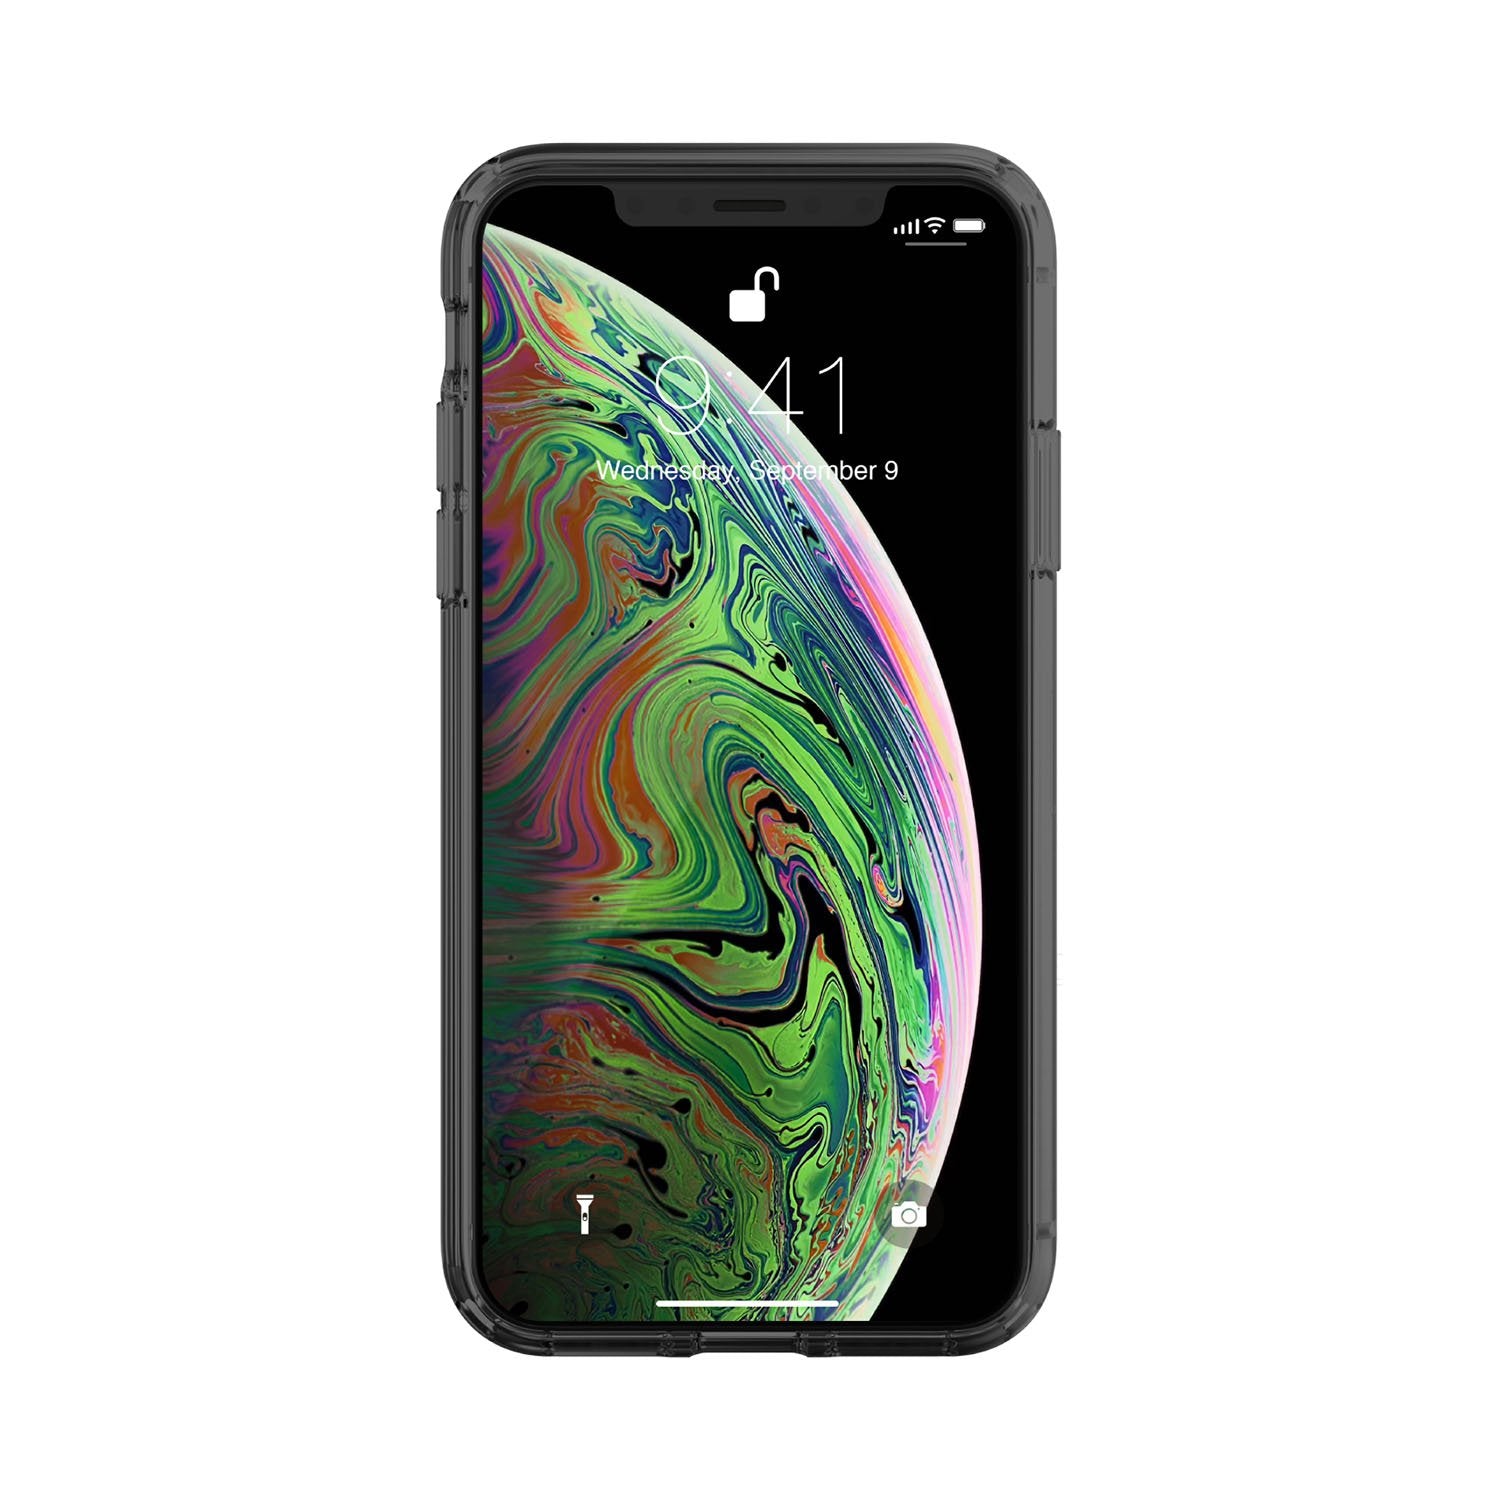 TENC Air - The most advanced composite slim bumper clear case with air cushions for the iPhone XS Max/XS/X - Just Mobile in Malaysia - Storming Gravity